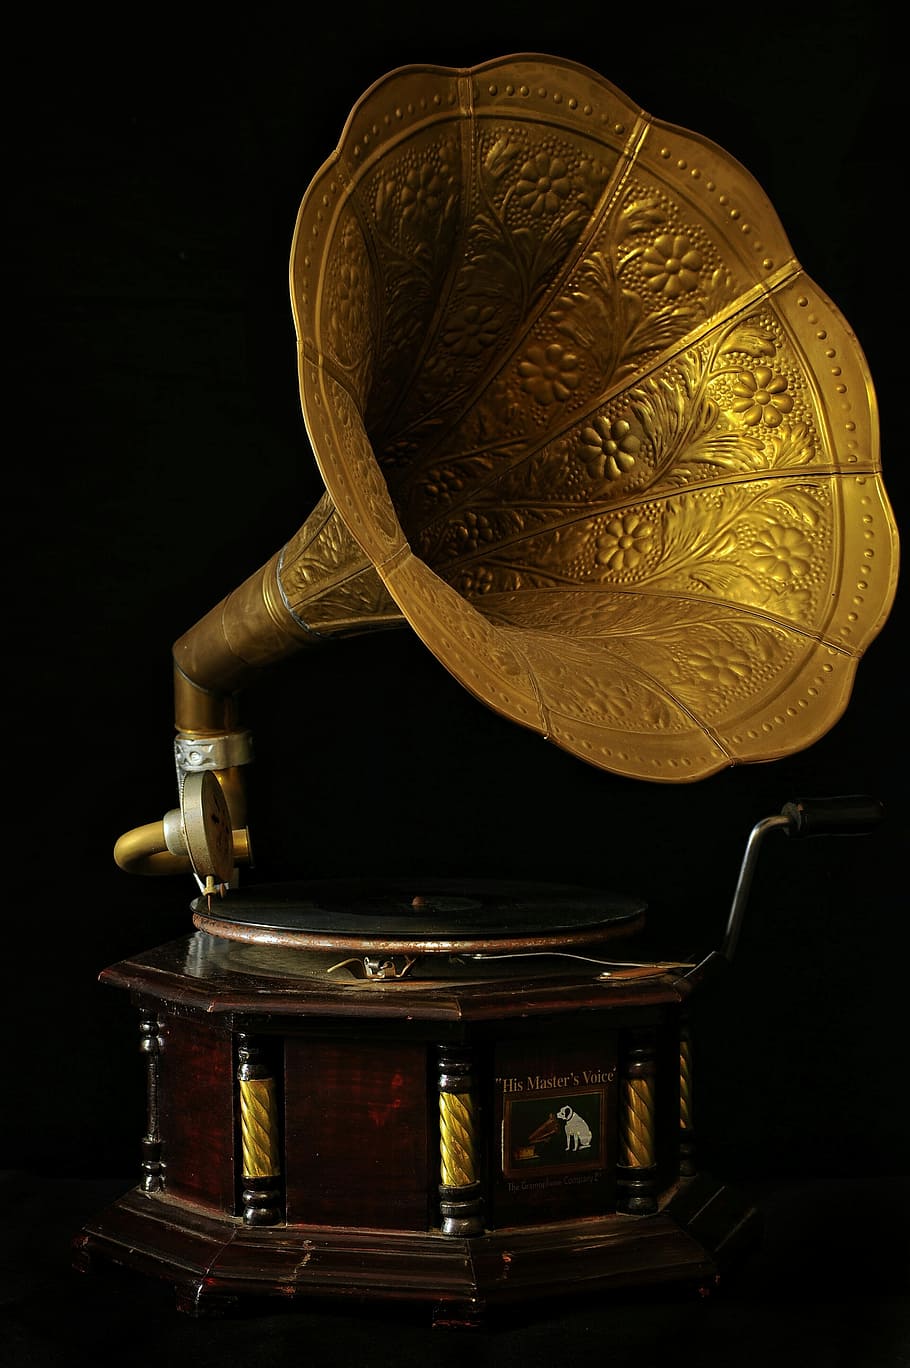 brown and gold-colored His Master's Voice gramophone, Turntable